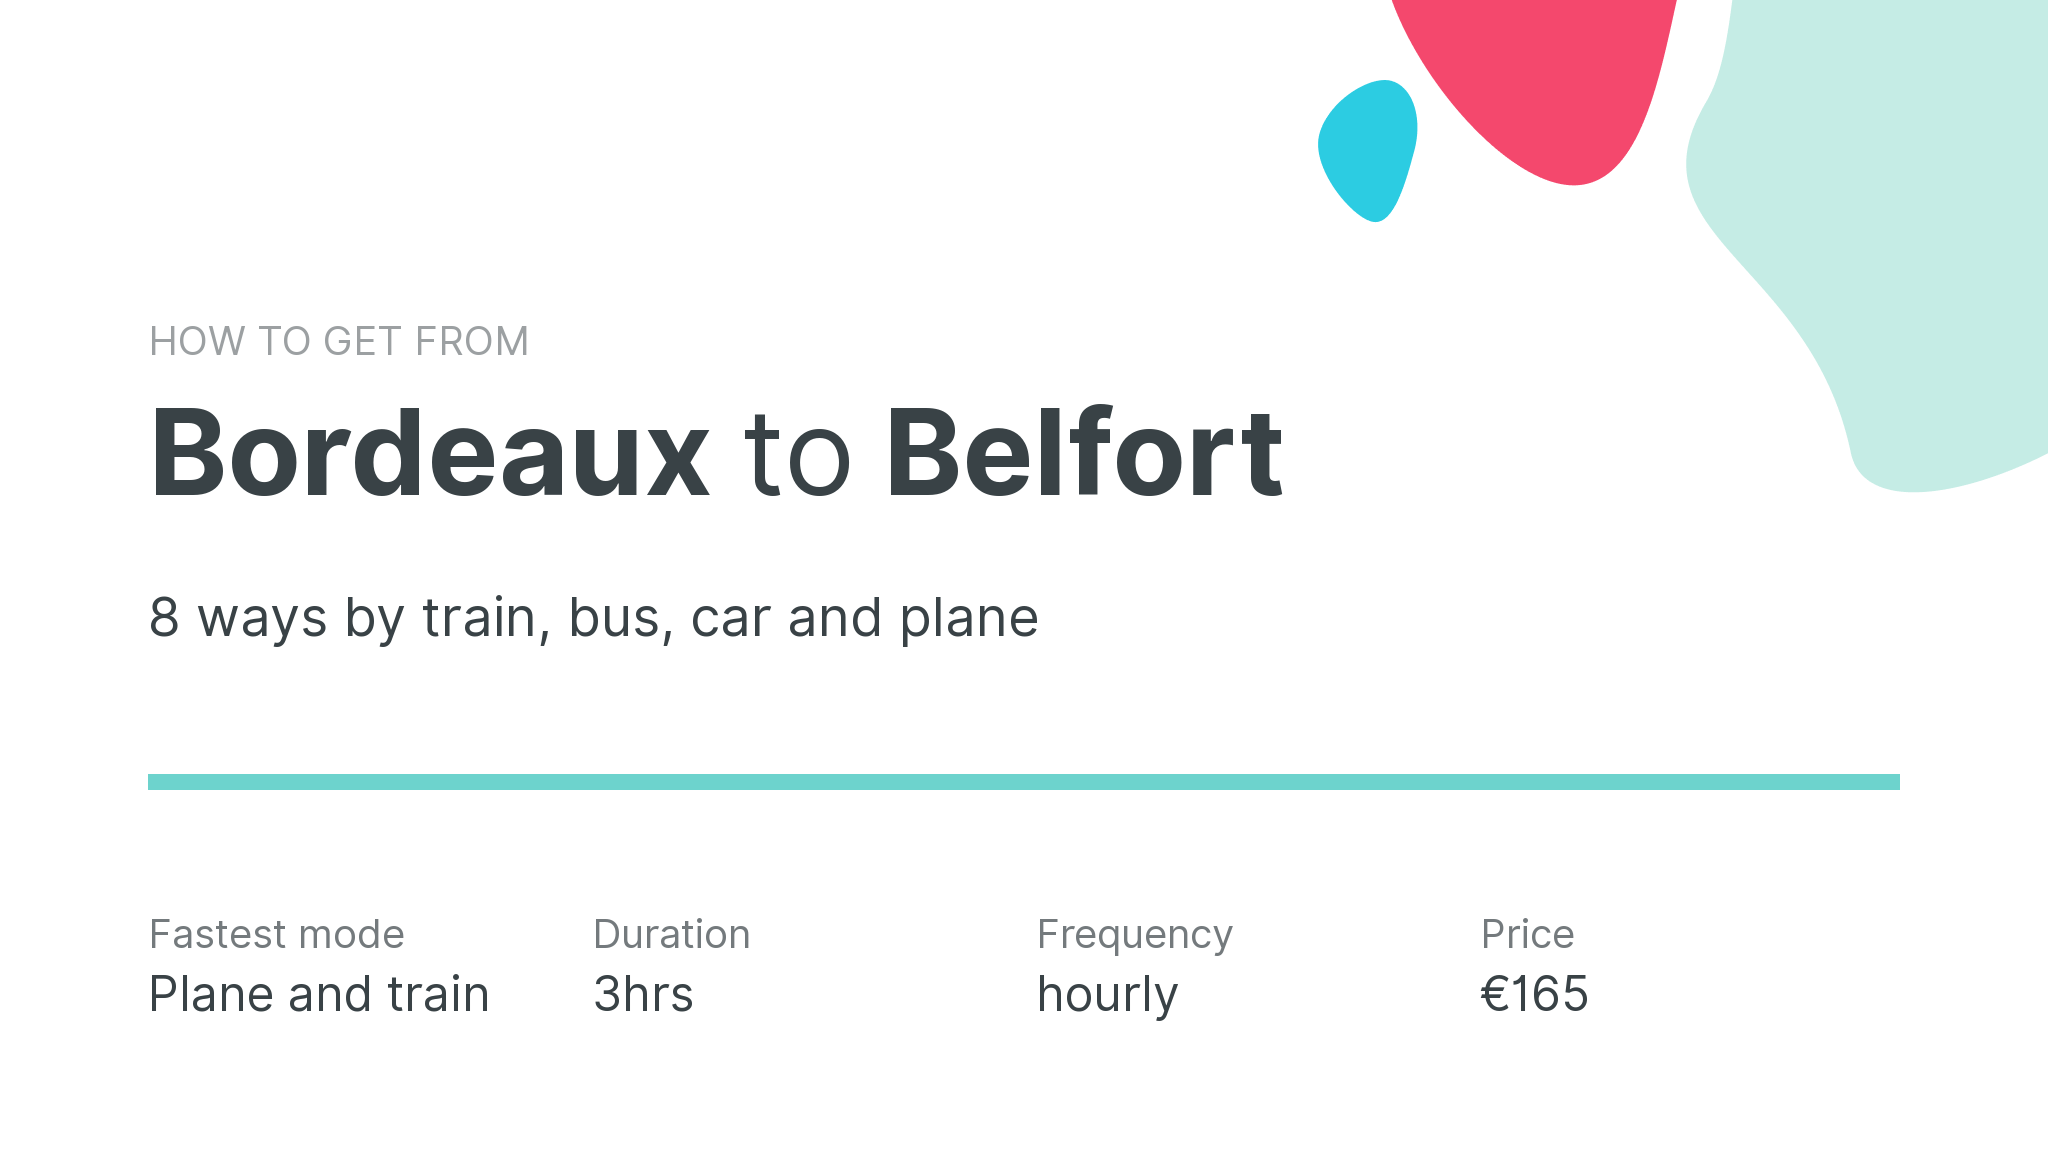 How do I get from Bordeaux to Belfort